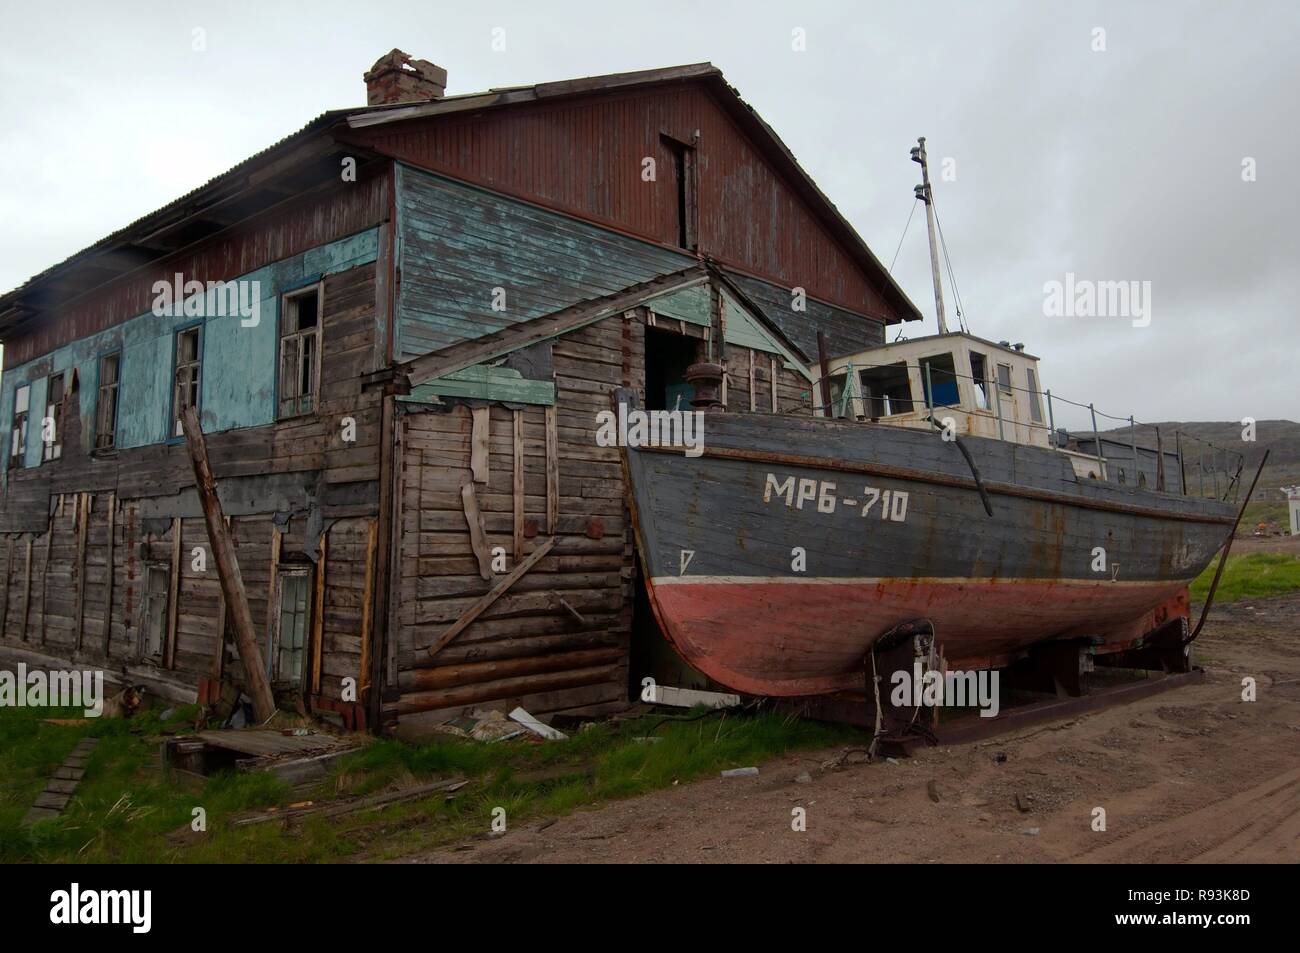 Derelict small fishing boat, MRB, in front of a derelict house in a rural locality, Dalniye Zelentsy, Kola Peninsula Stock Photo